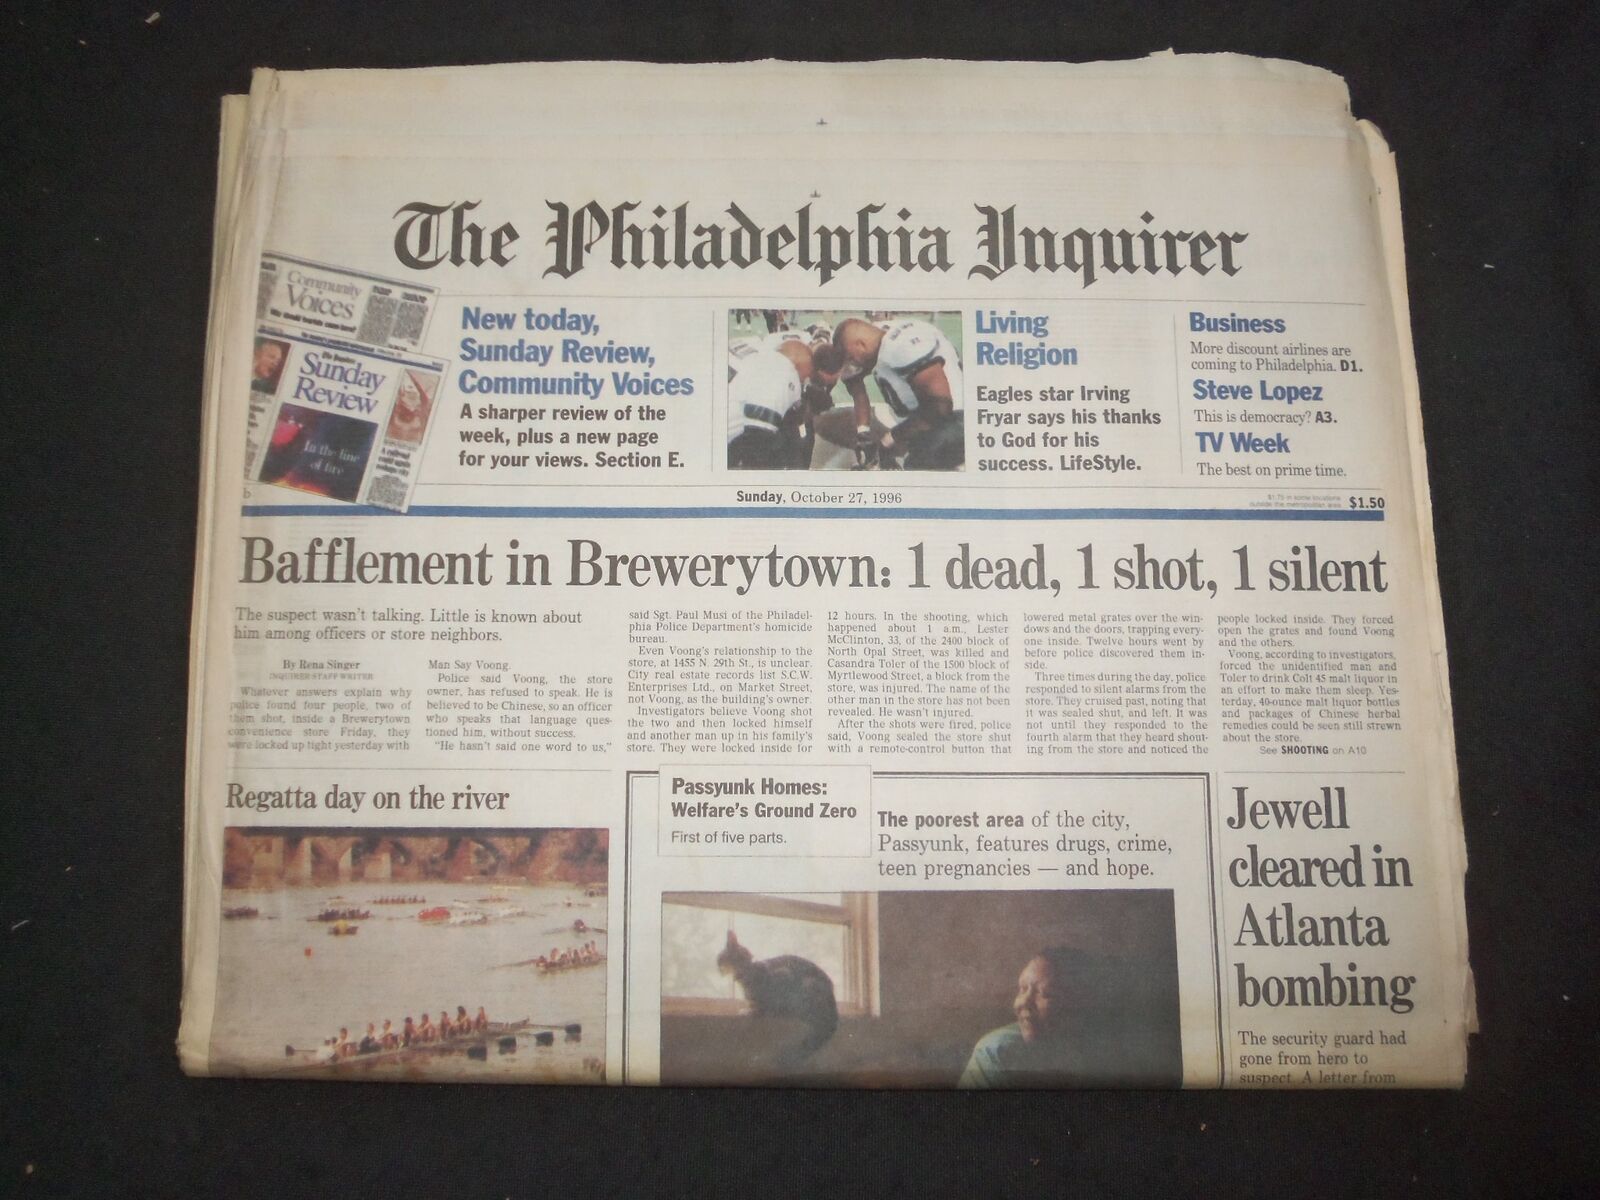 1996 OCT 27 PHILADELPHIA INQUIRER - JEWELL CLEARED IN ATLANTA BOMBING - NP 7446